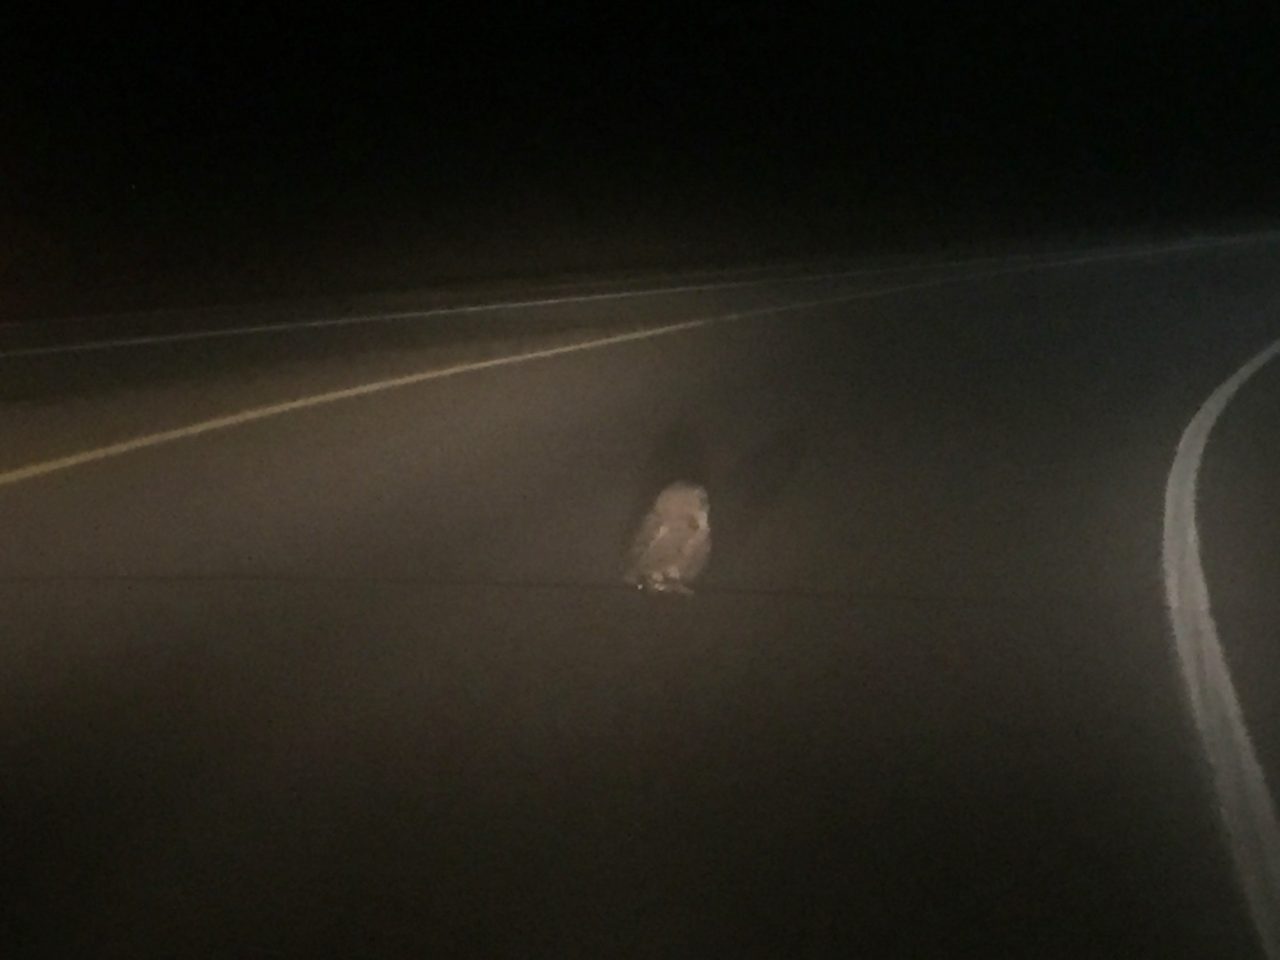 A large owl landed in the road in front of us